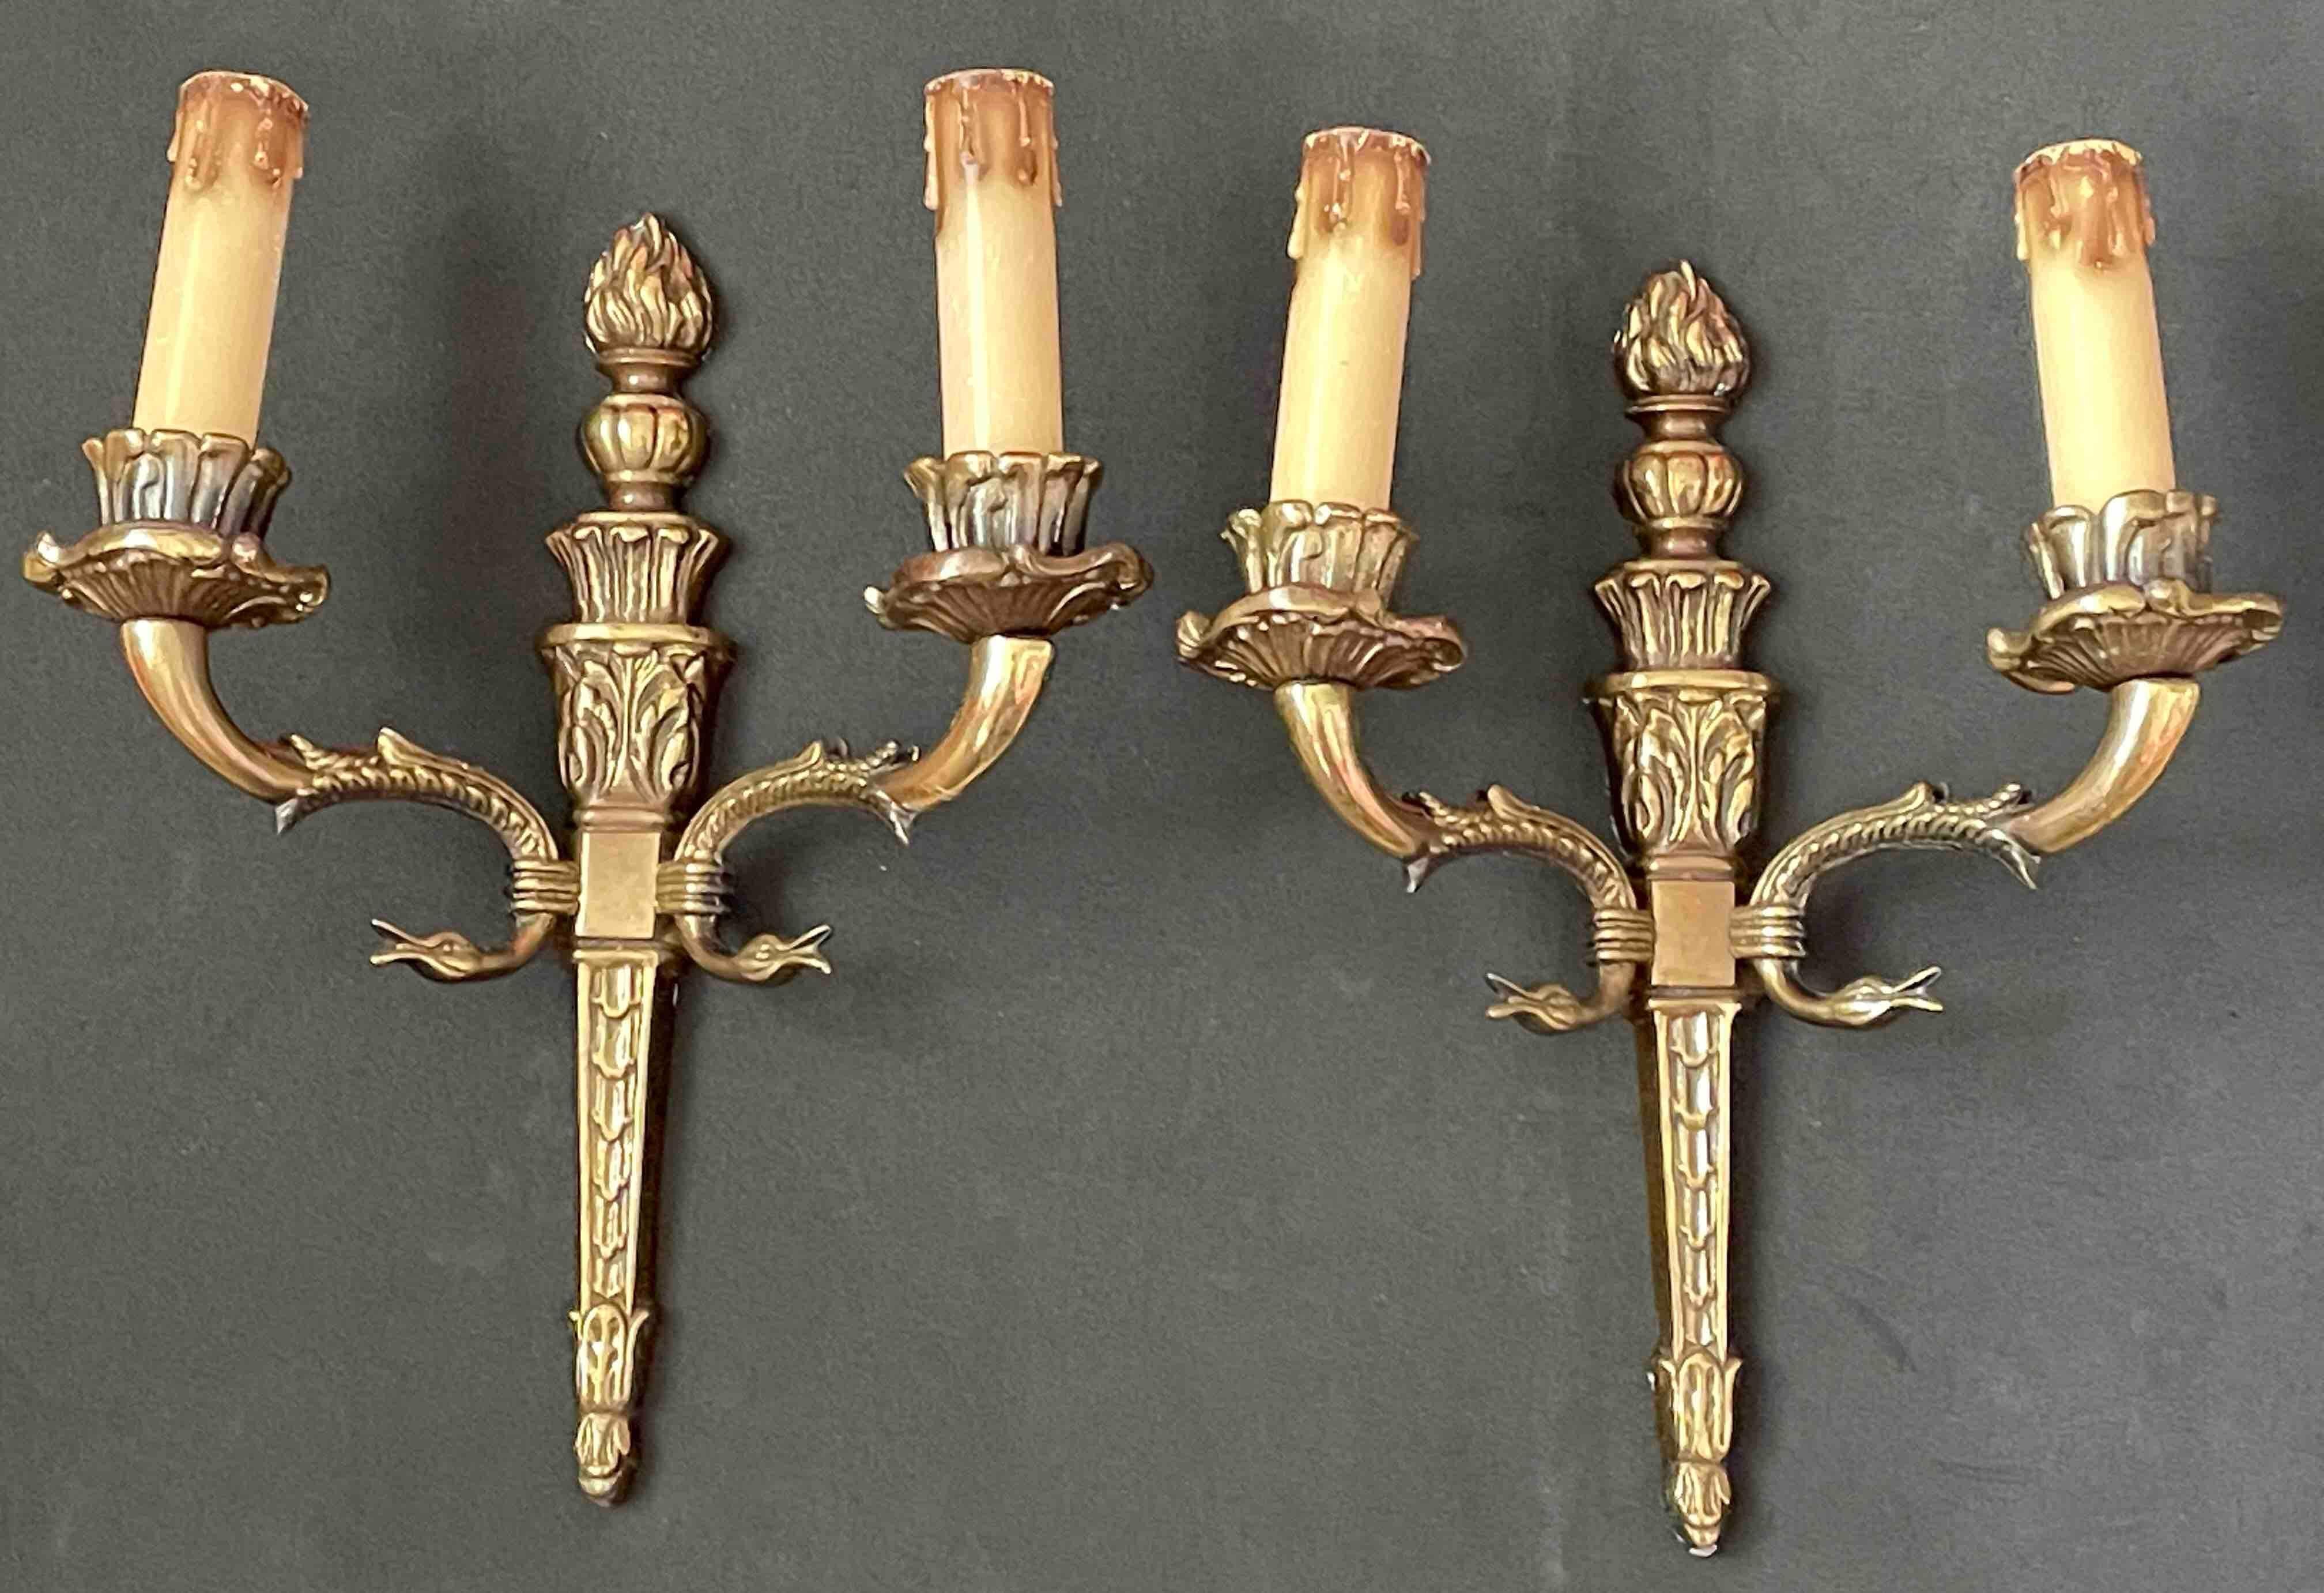 Pair of Empire Wall Sconces in Bronze with Swan Goose Motif Arms, Italy, 1950s For Sale 3